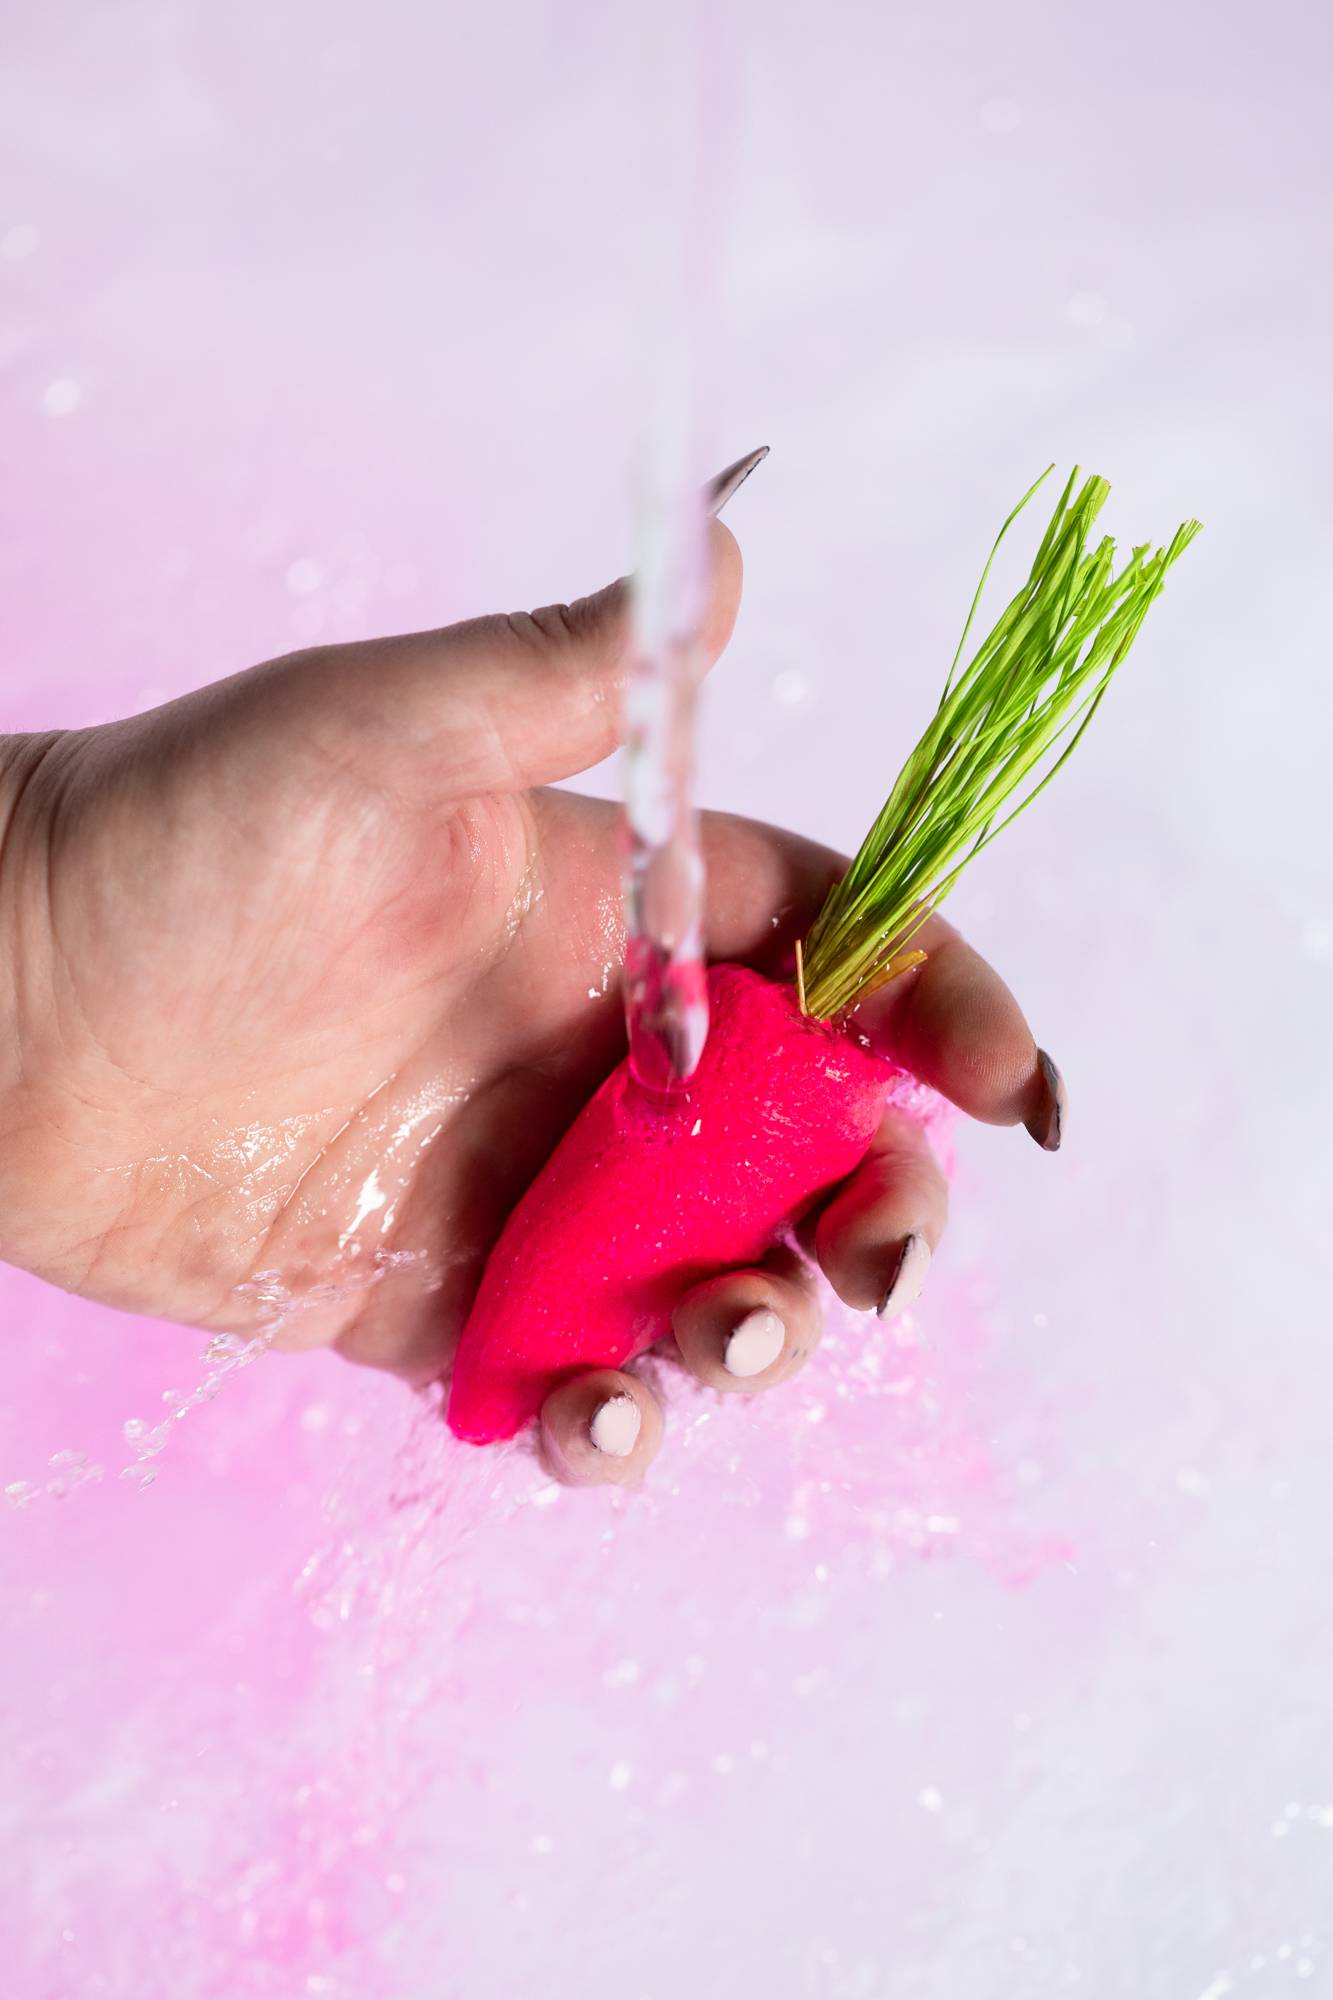 A close-up image of the model's hand holding the pink carrot bubble bar under running water creating light, bubbly water below. 